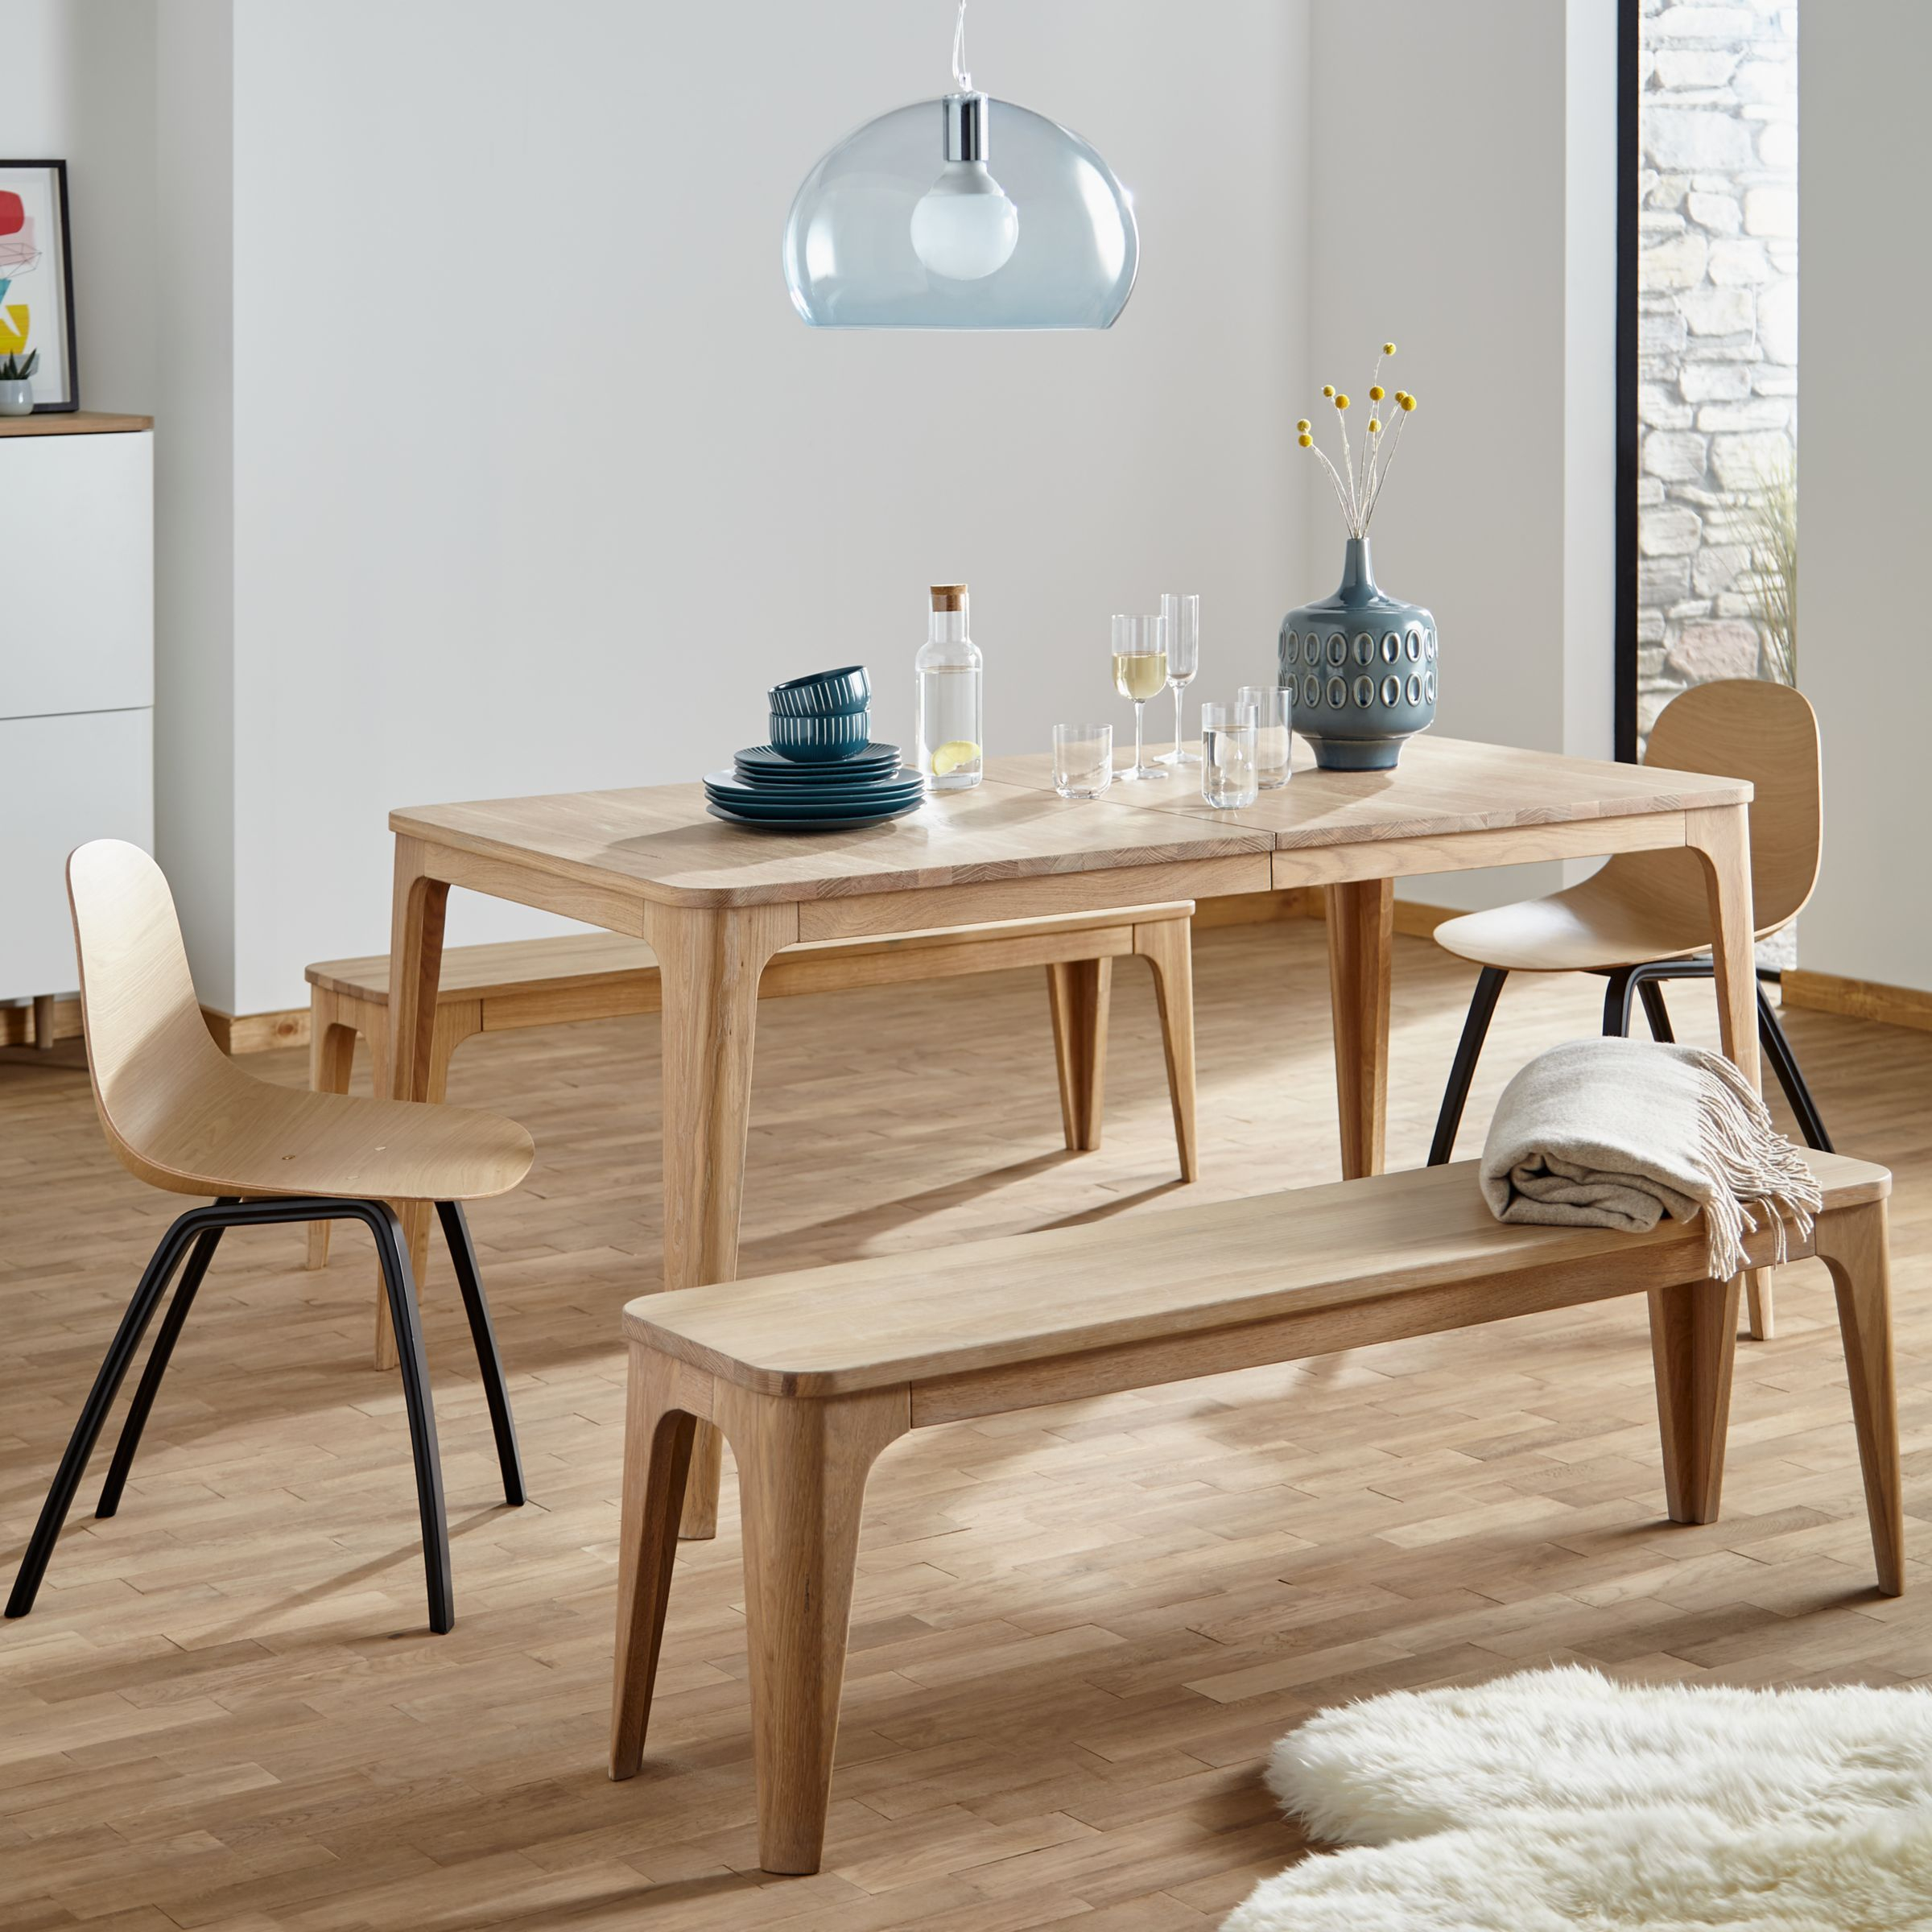 Ebbe Gehl For John Lewis Mira 6 8 Seater Extending Dining inside dimensions 2400 X 2400